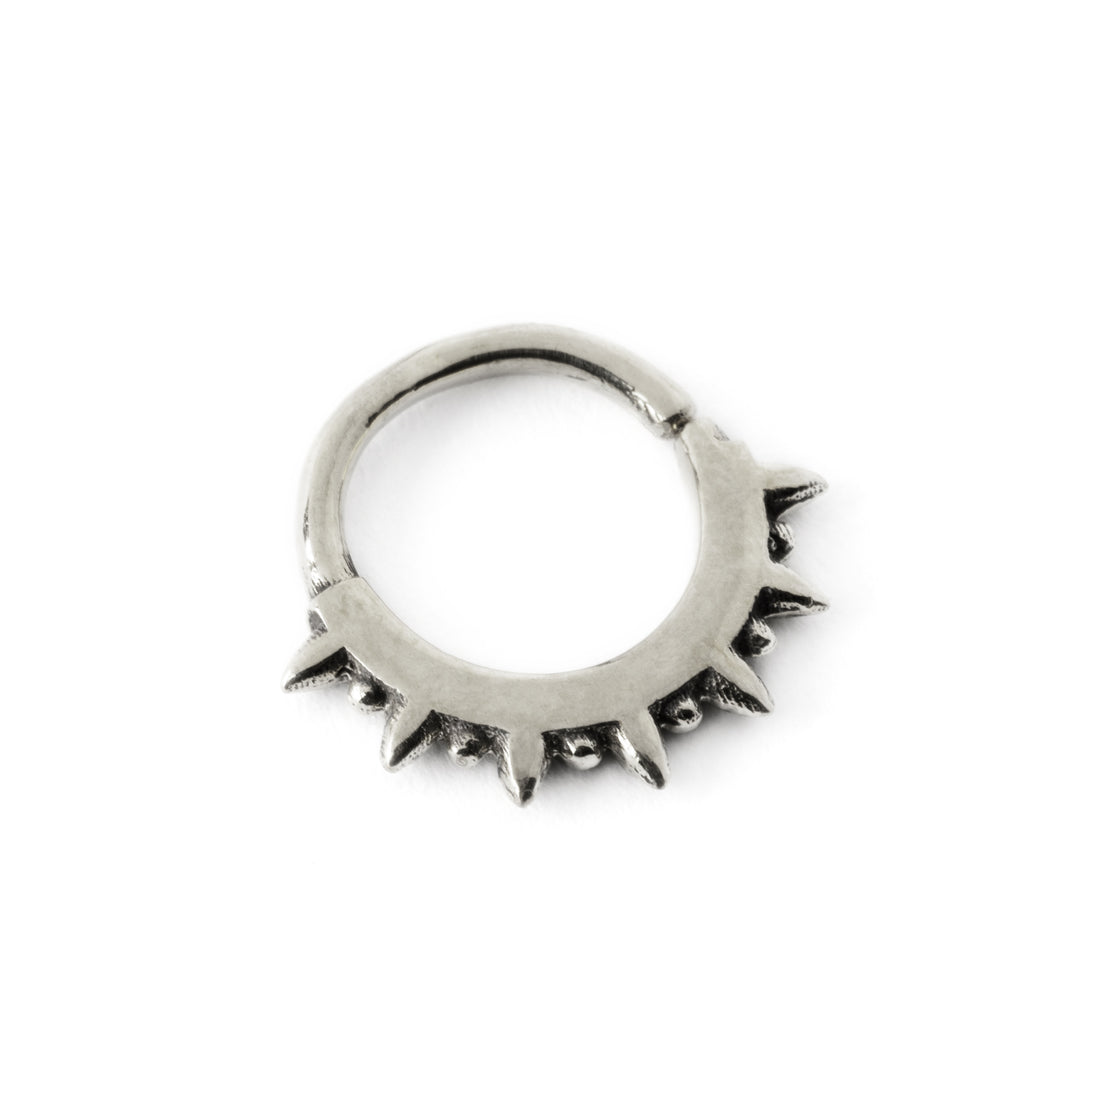 Shani silver septum ring with spiky ends right side view